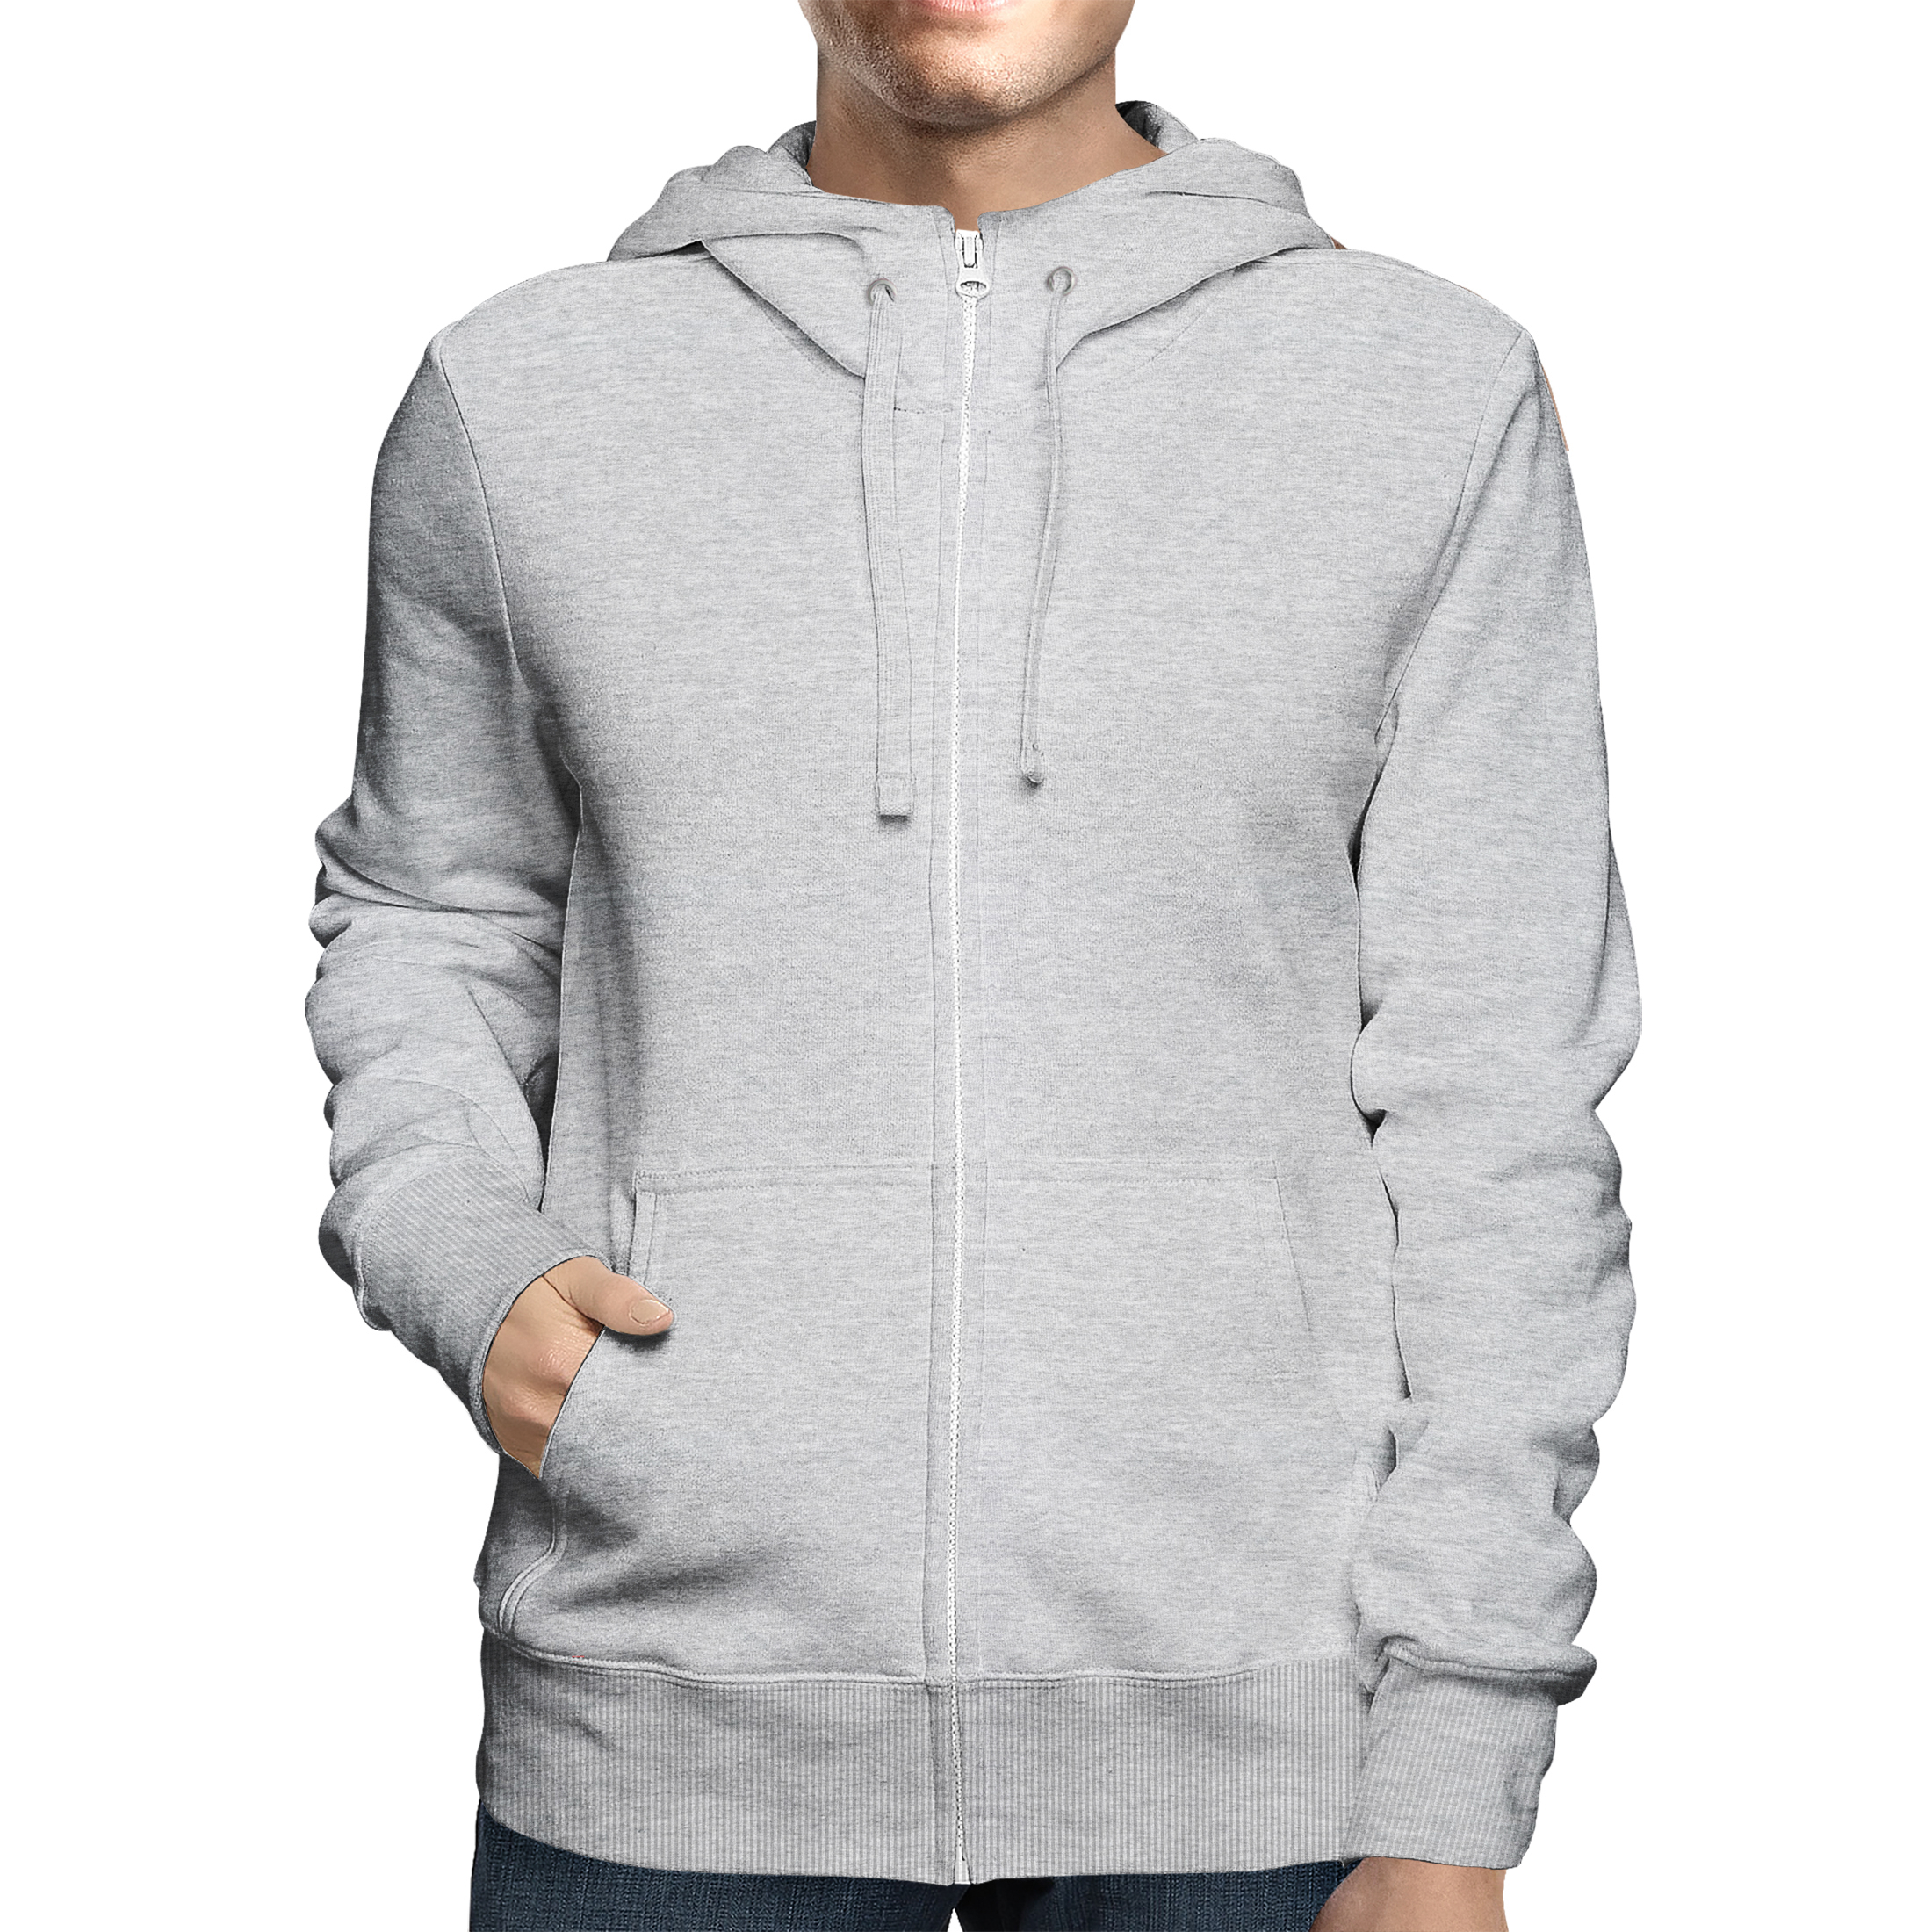 2-Pack: Men's Full Zip Up Fleece-Lined Hoodie Sweatshirt (Big & Tall Size Available) - Gray, 3x-large